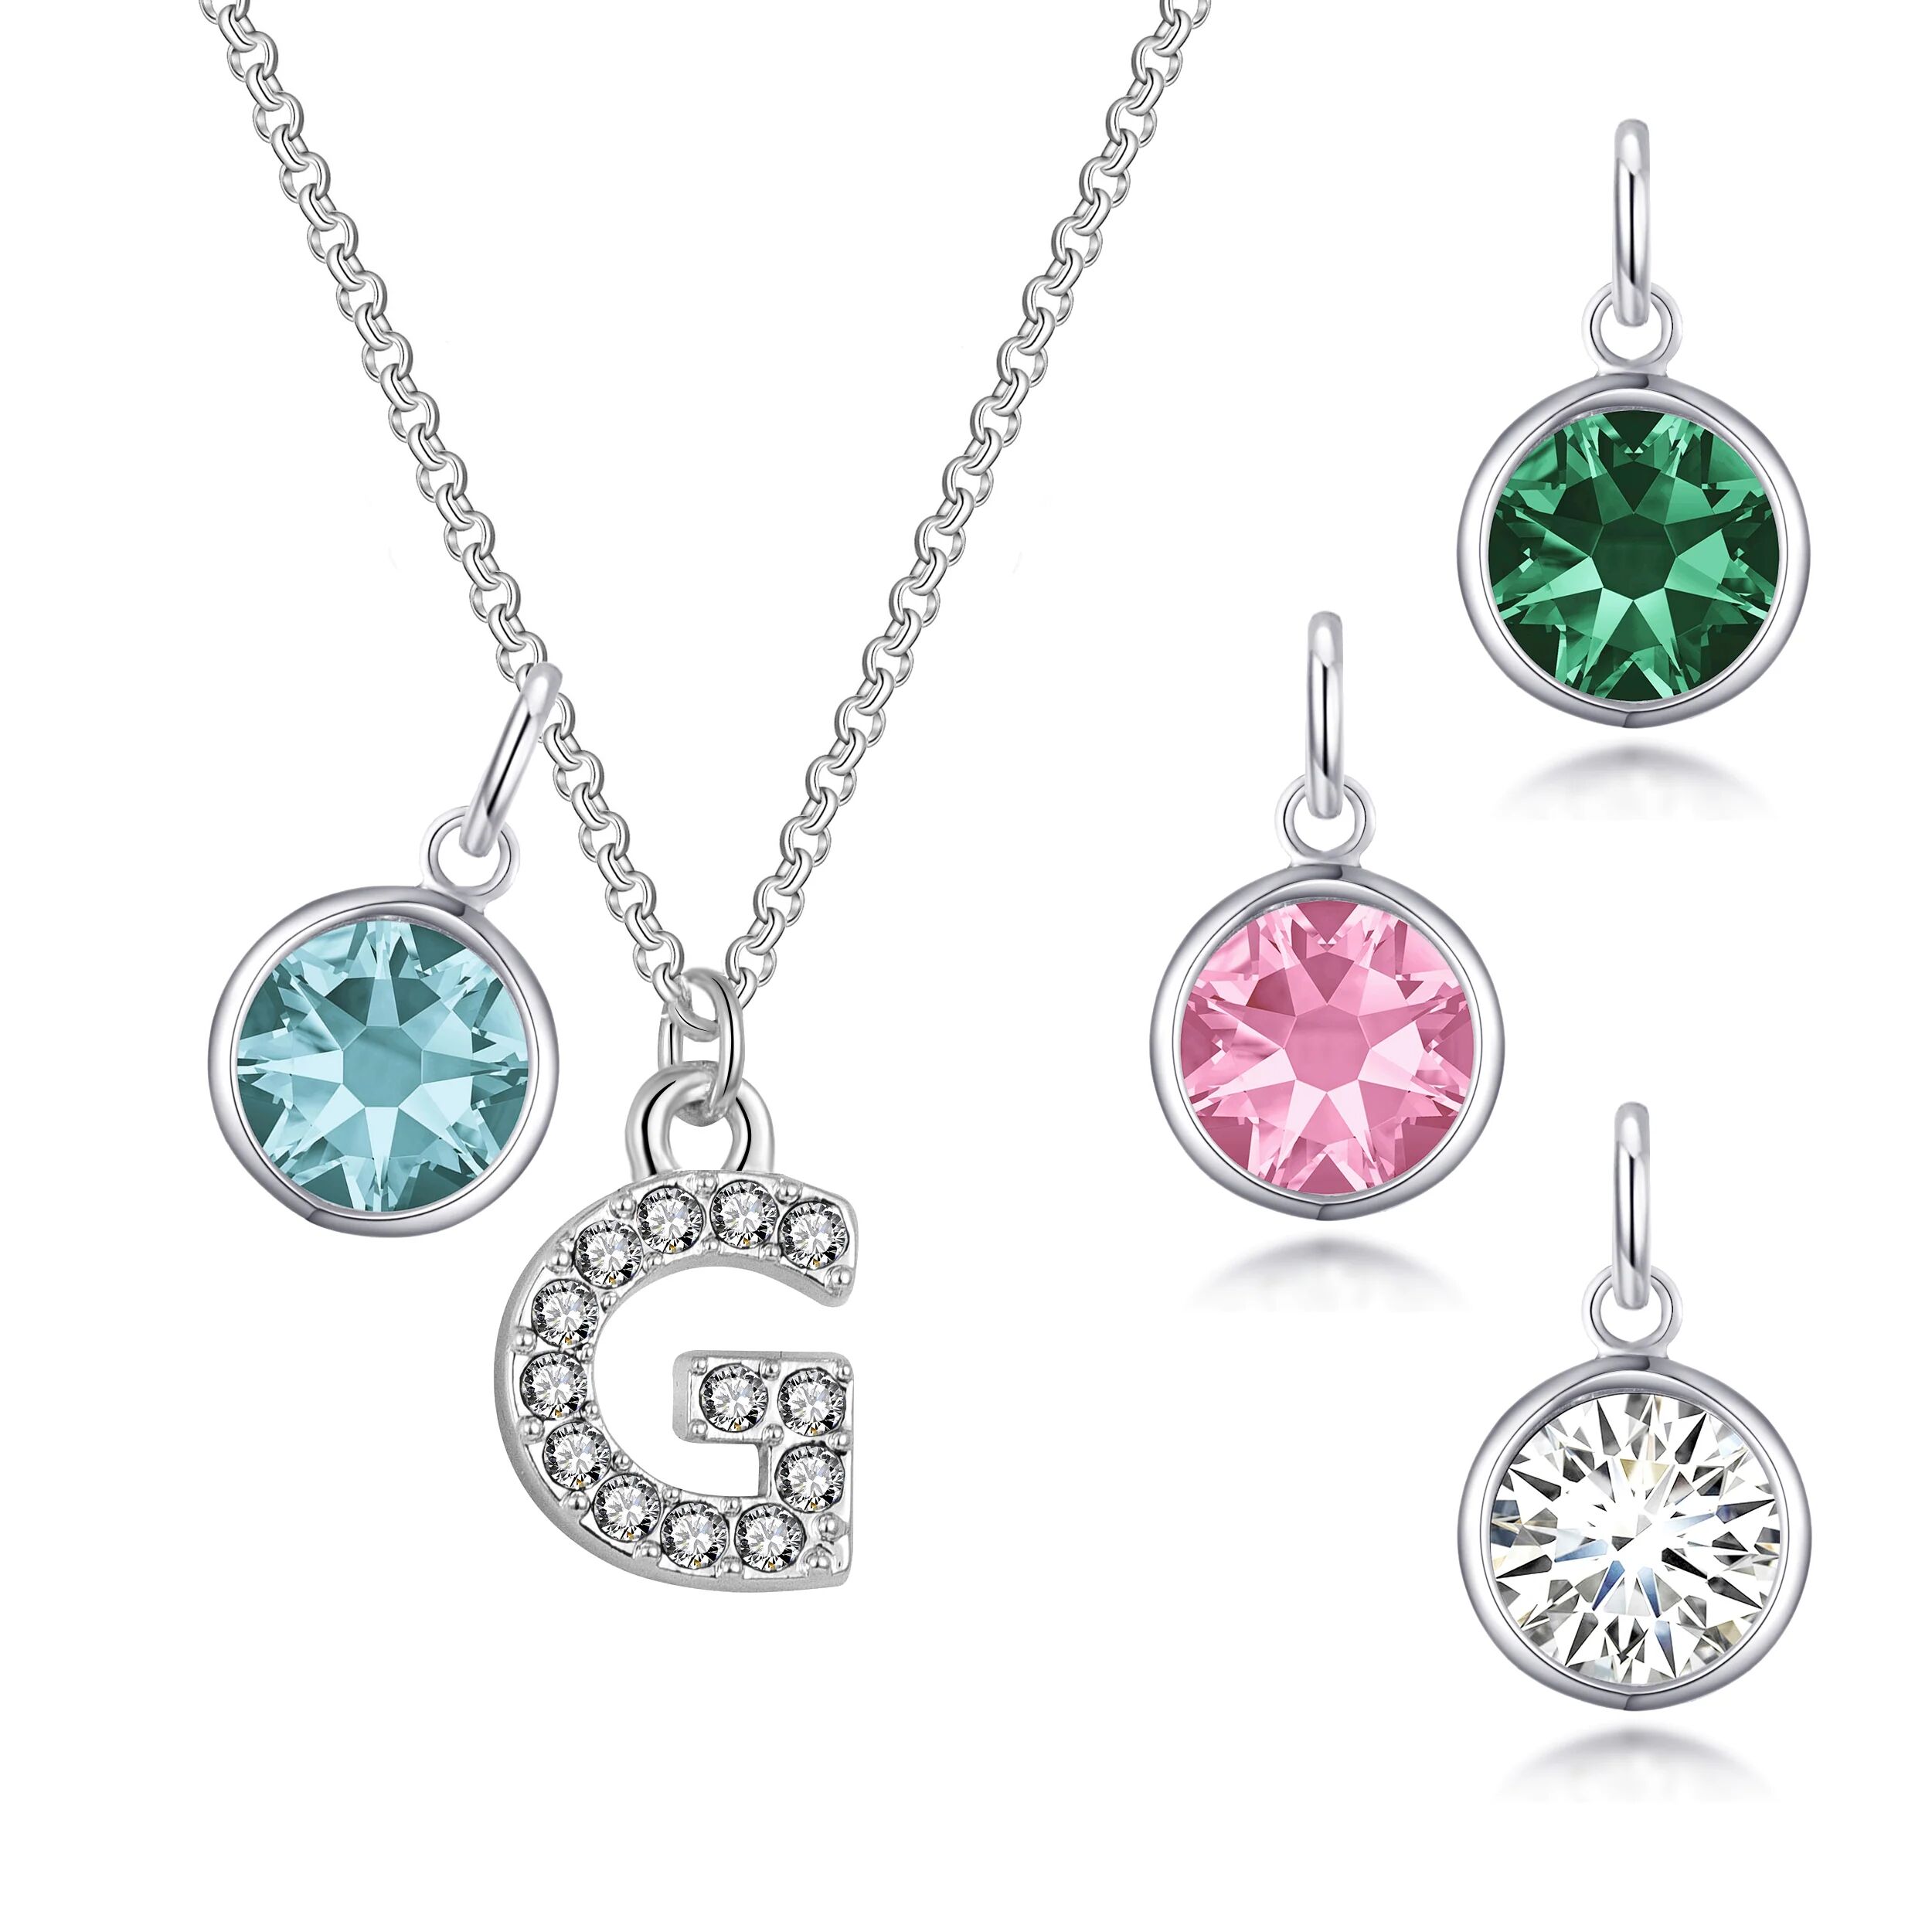 Philip Jones Jewellery Pave Initial G Necklace with Birthstone Charm Created with Zircondia® Crystals